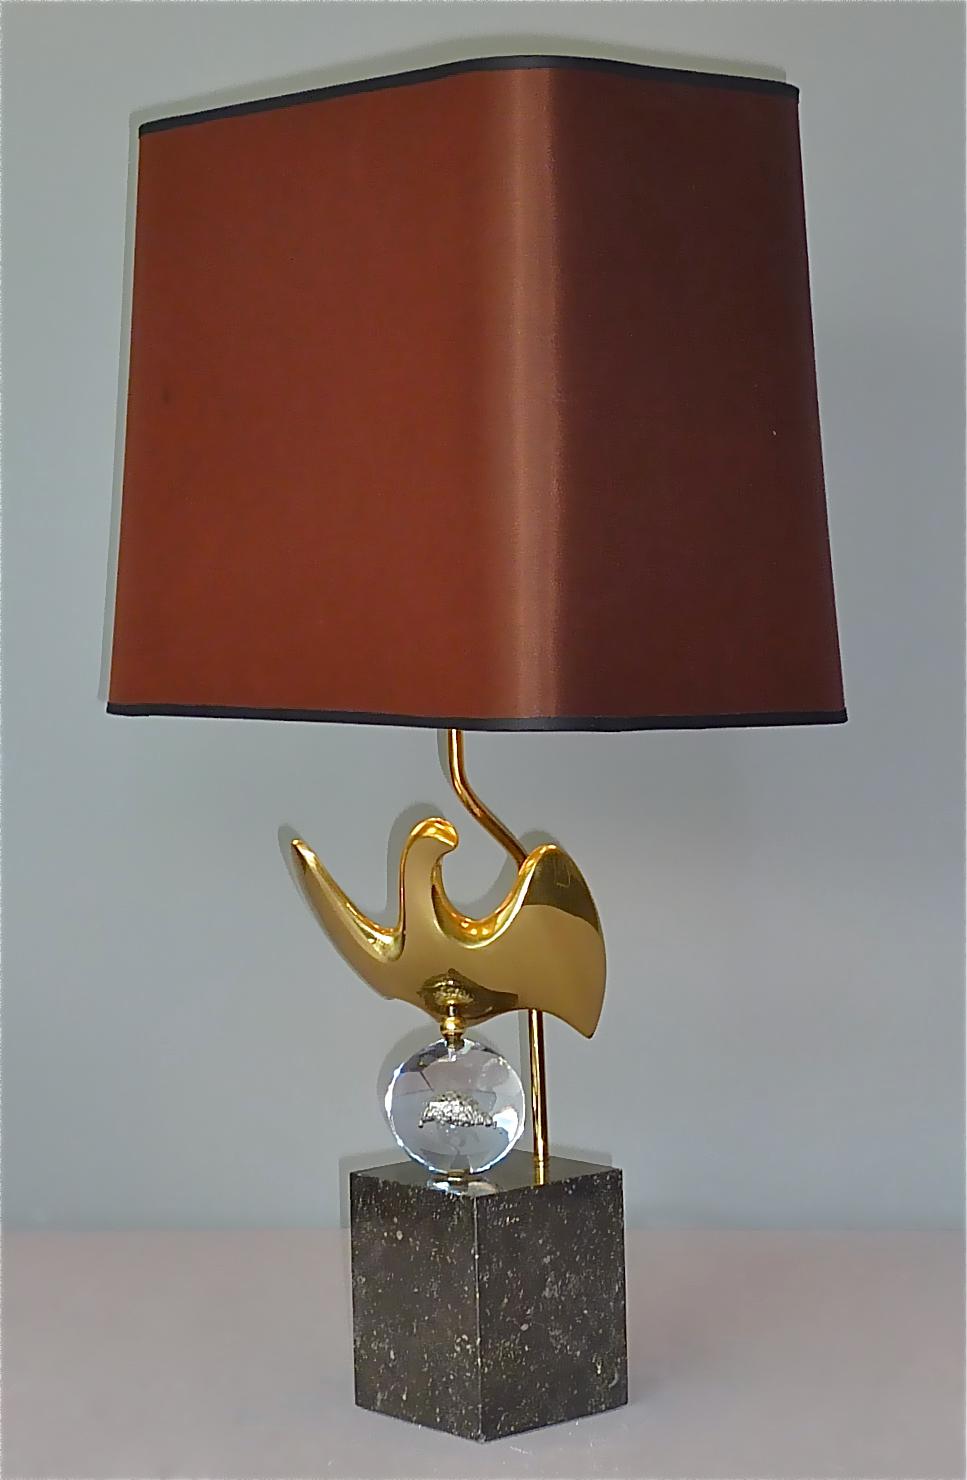 Rare Sculptural French Gilt Bronze Bird Table Lamp Signed Philippe Jean 107/300  For Sale 11